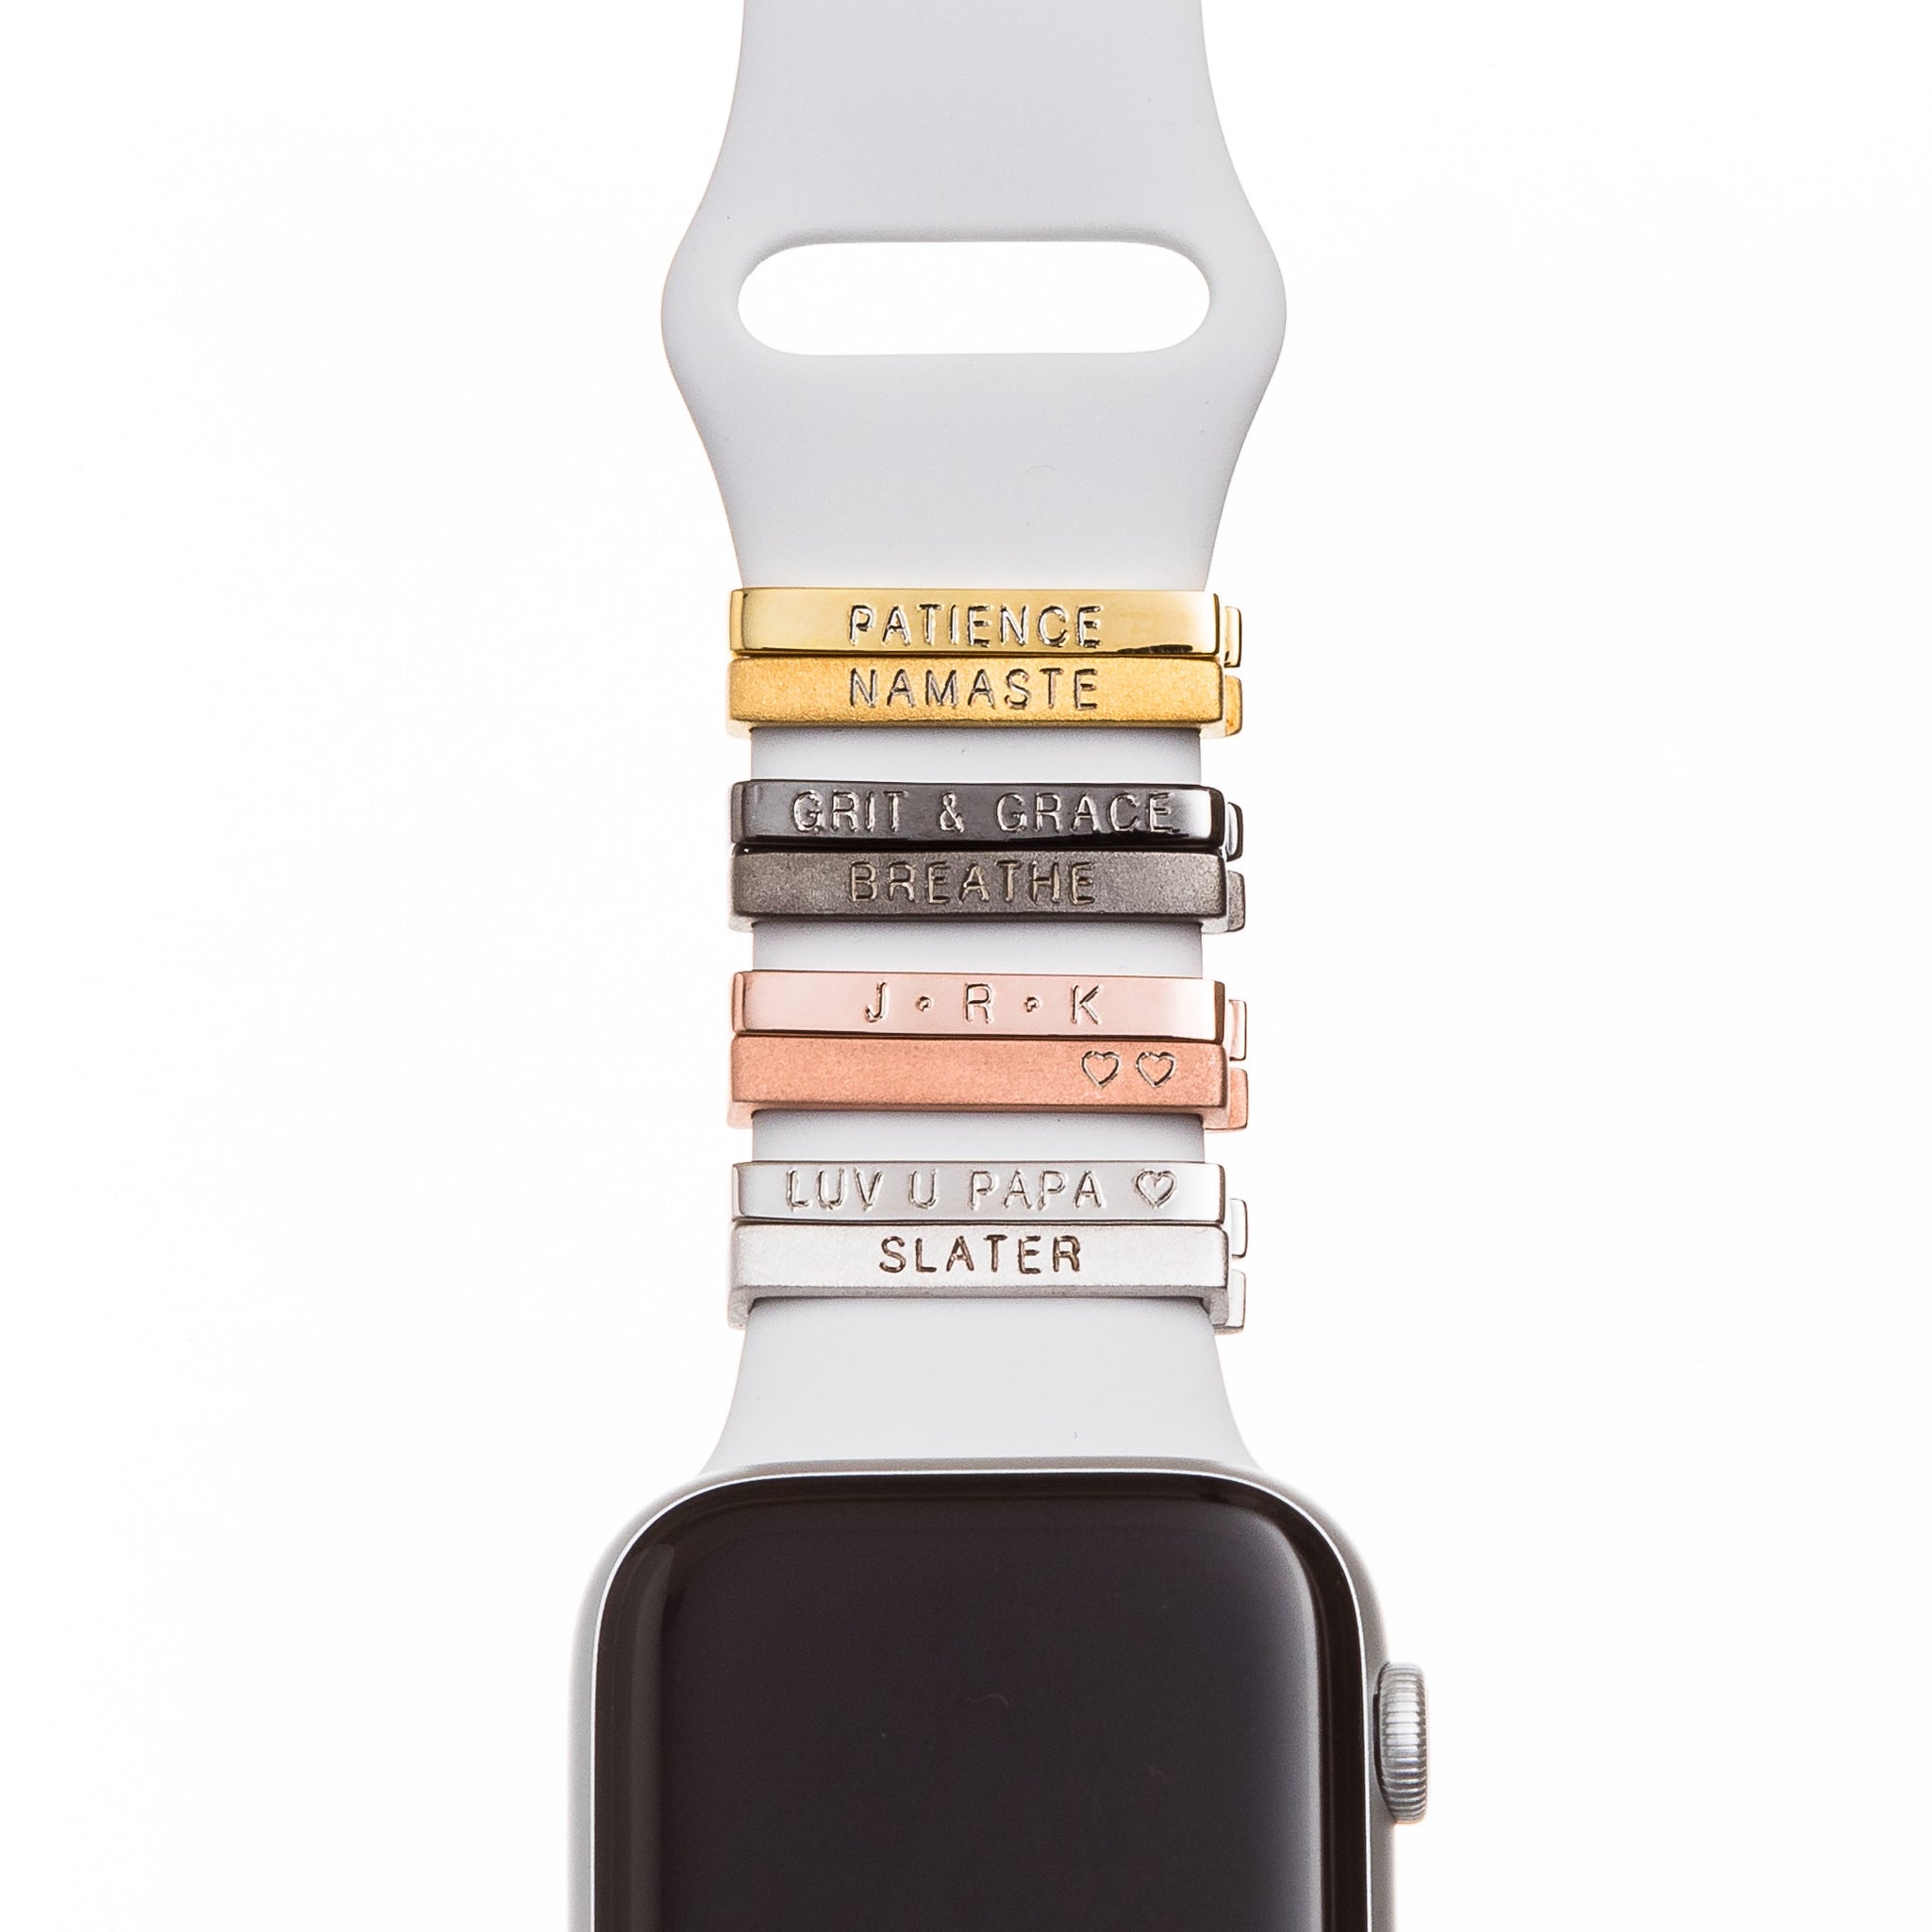 Apple Watch with white Sport band custom engraved 3mm satin and polished clasps